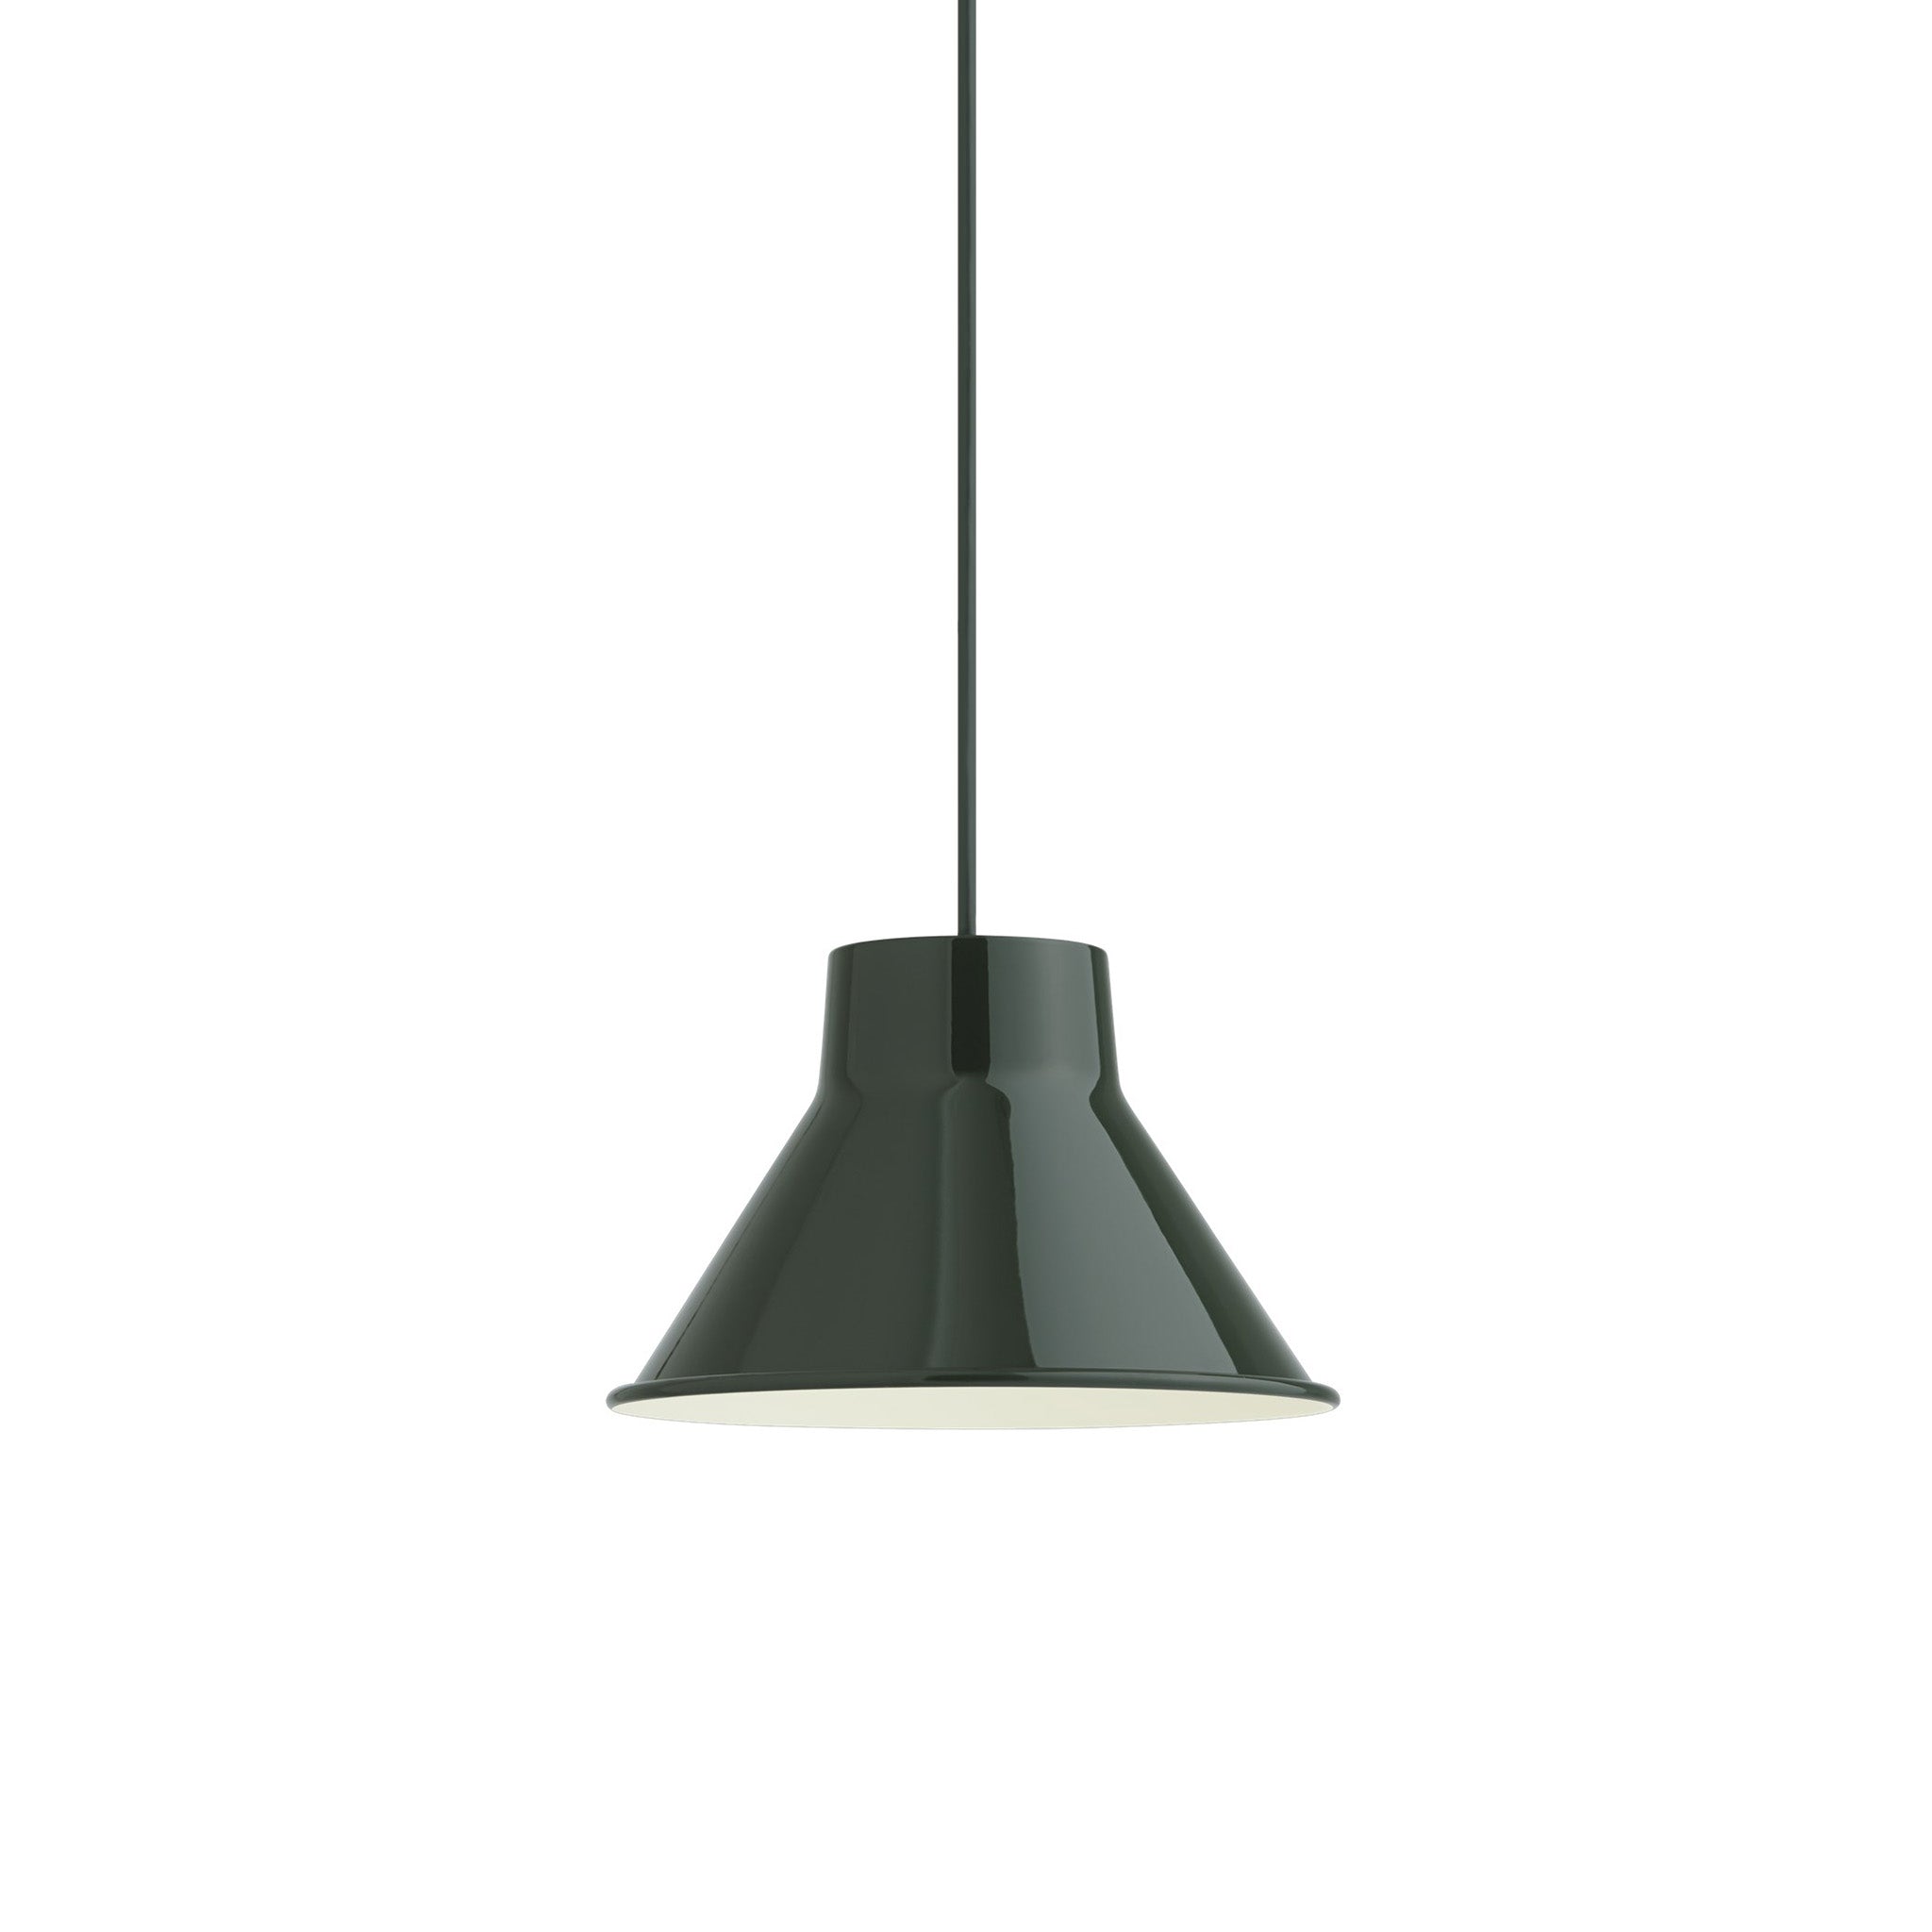 Top Pendant By Big Game for Muuto